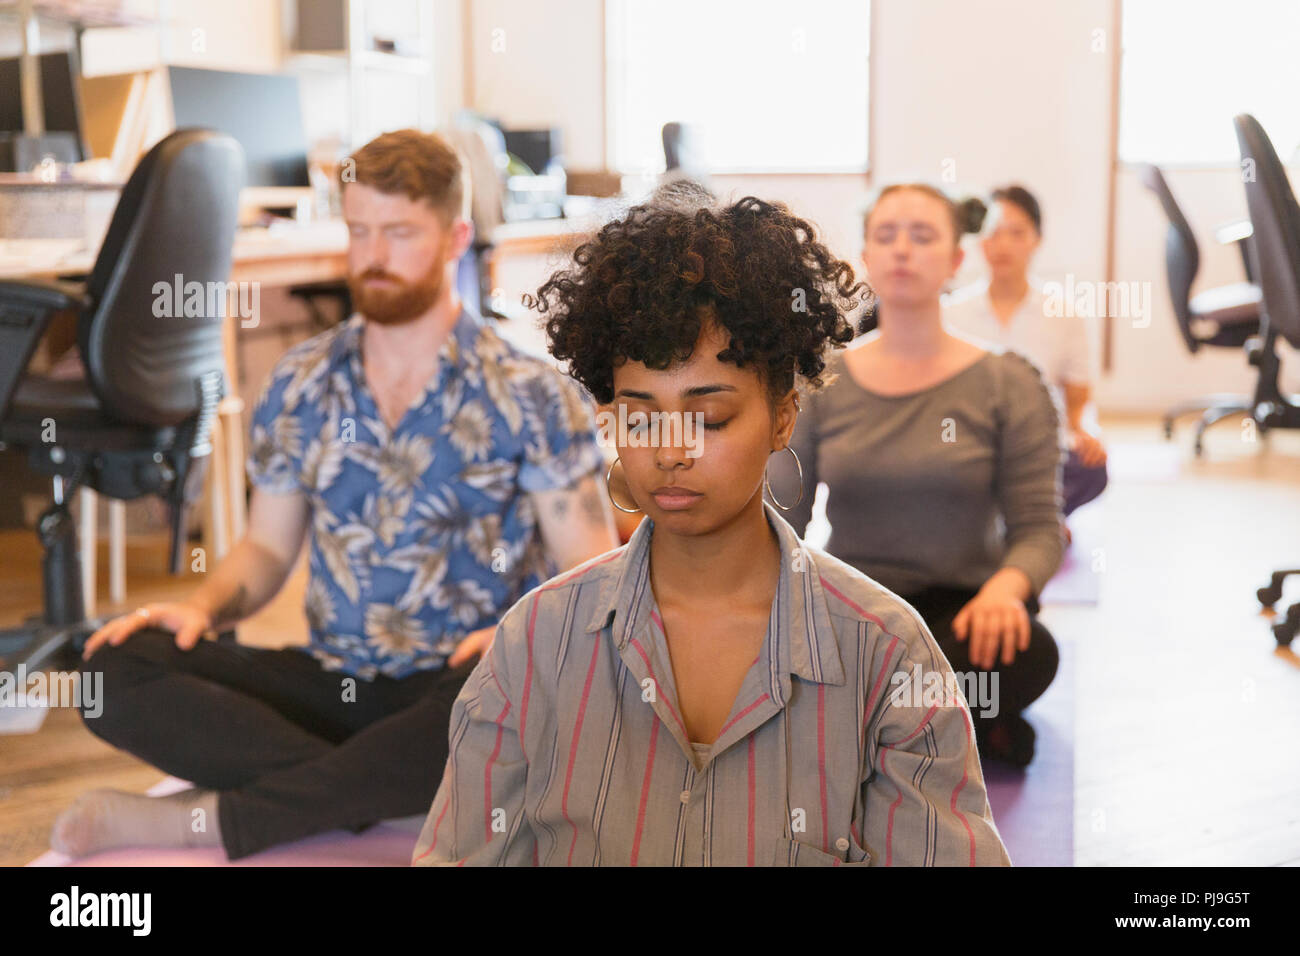 Serene creative business people meditating in office Stock Photo